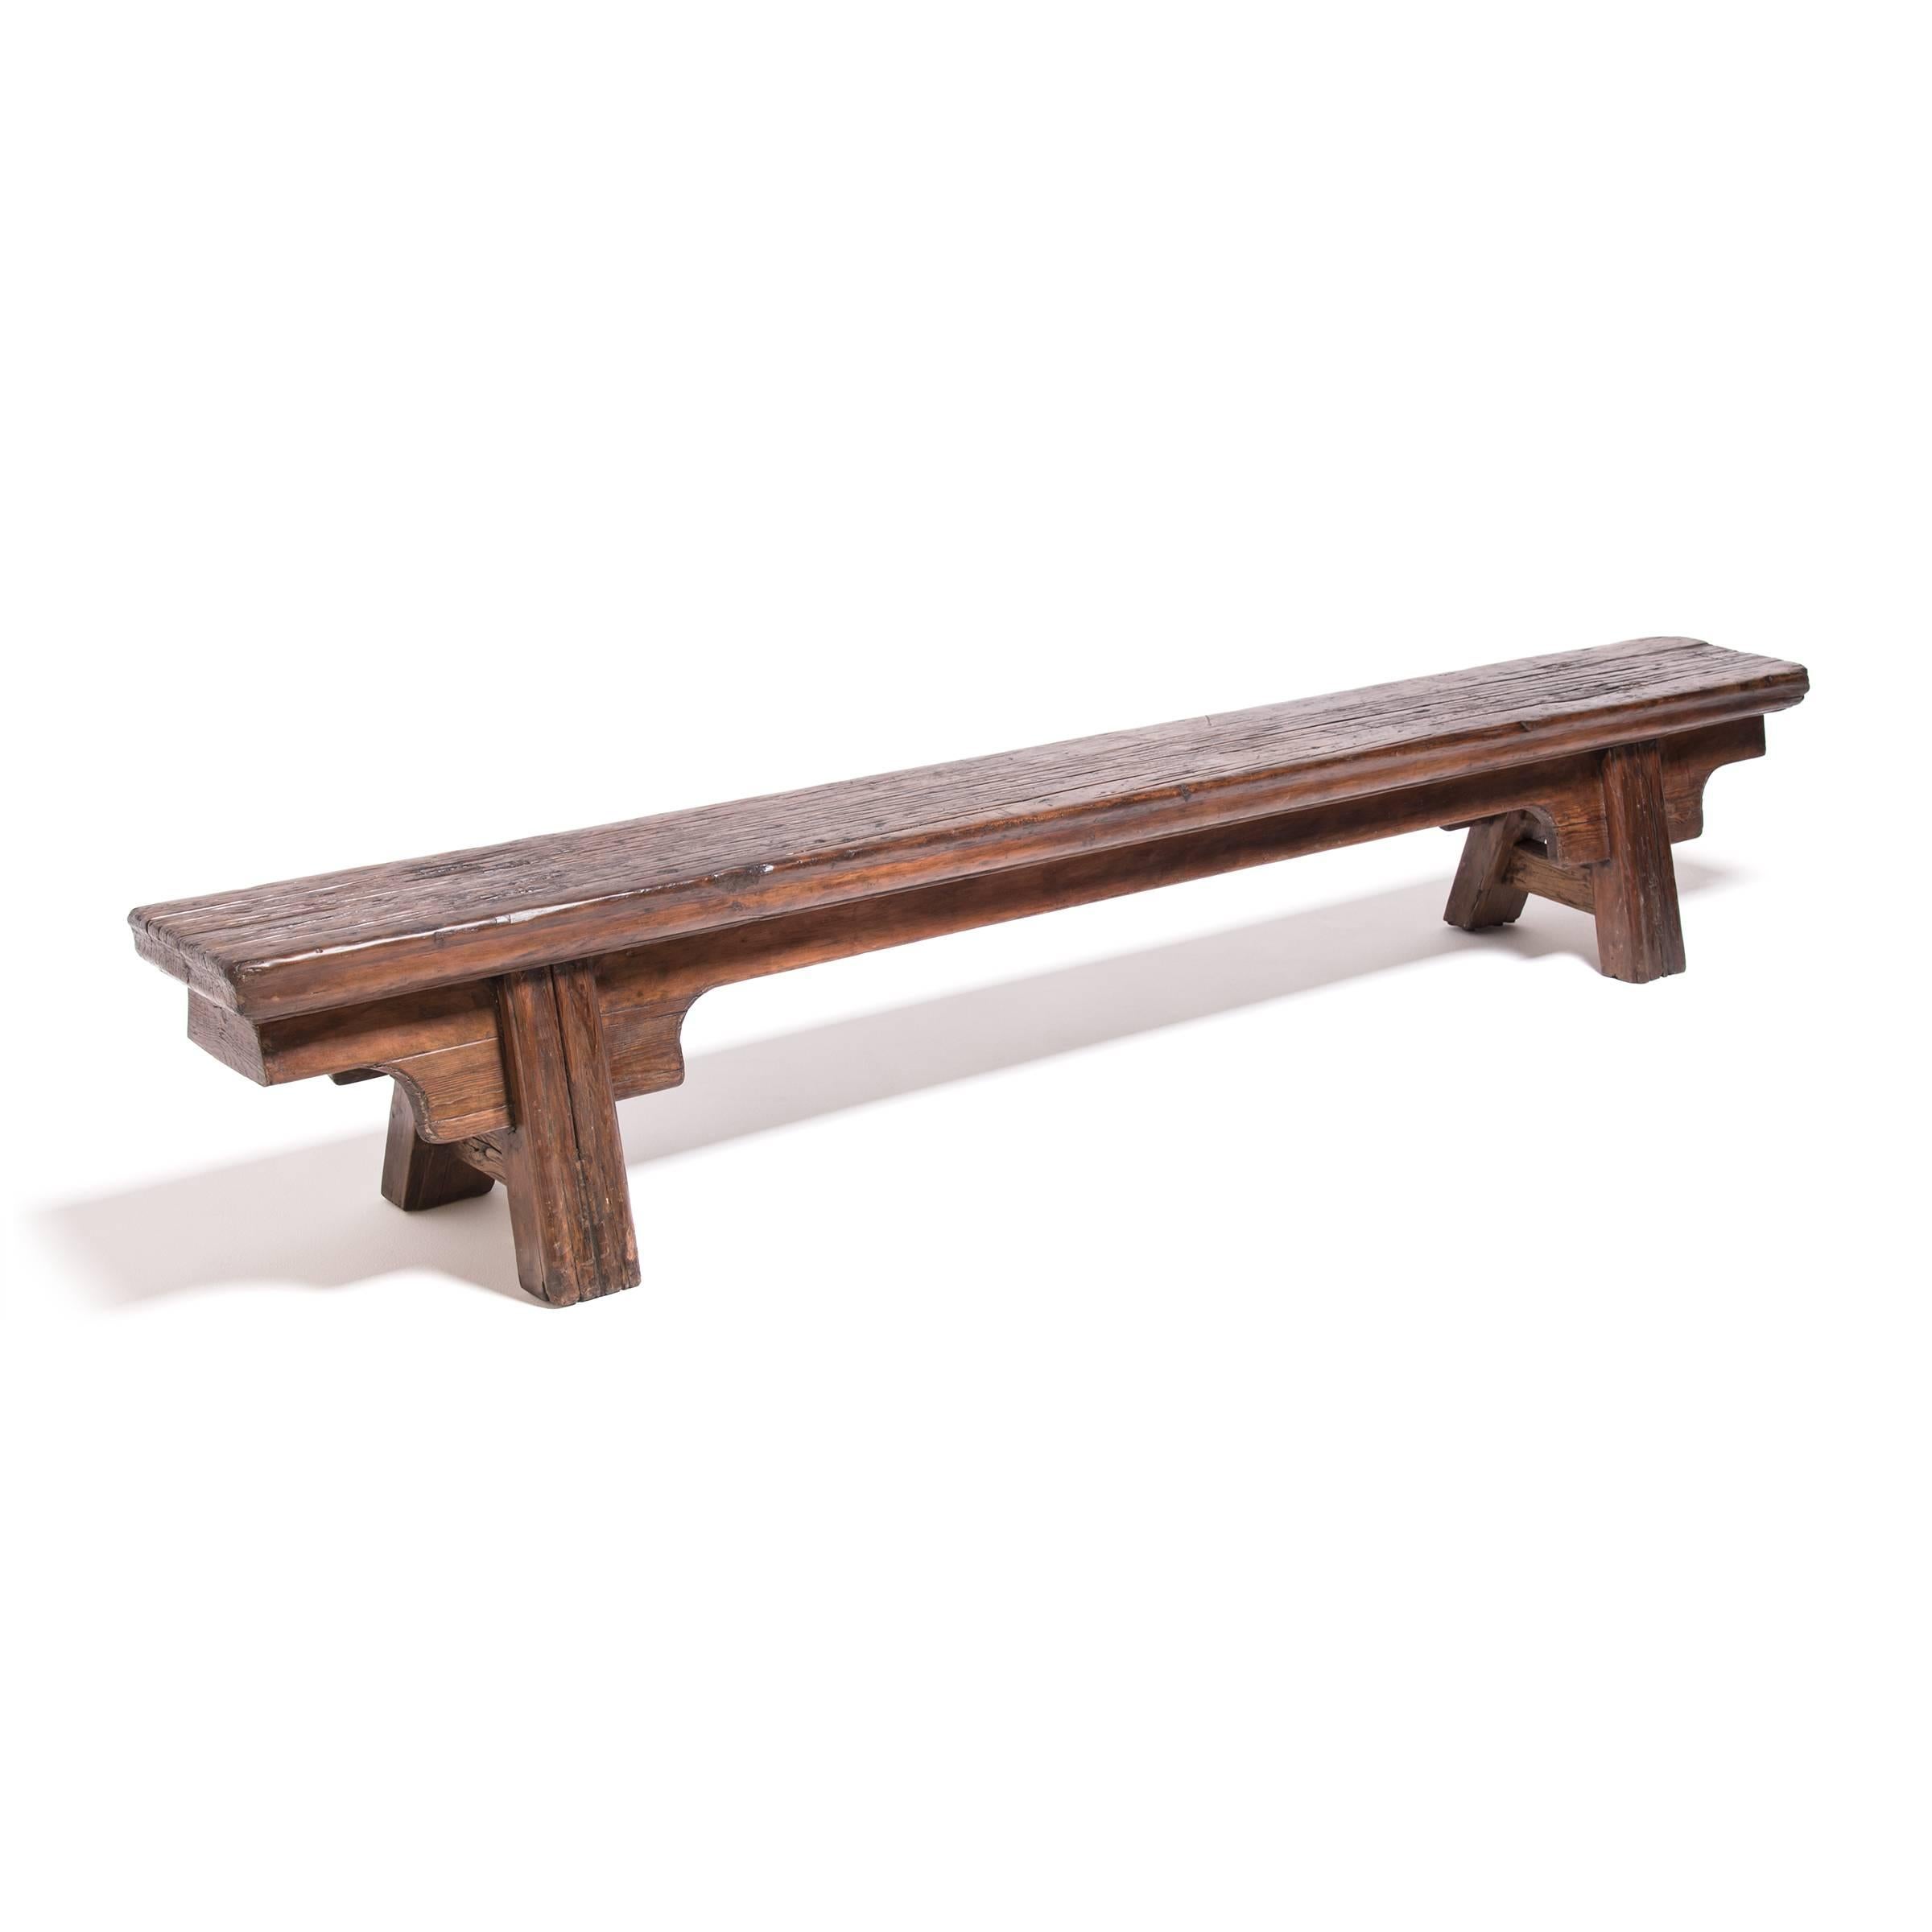 During the Qing dynasty, long benches such as this were used as shared seating and were often found in public spaces like temples, theaters, or courtyards. Crafted in China's Shanxi province over 150 years ago, this low bench has a timeless form